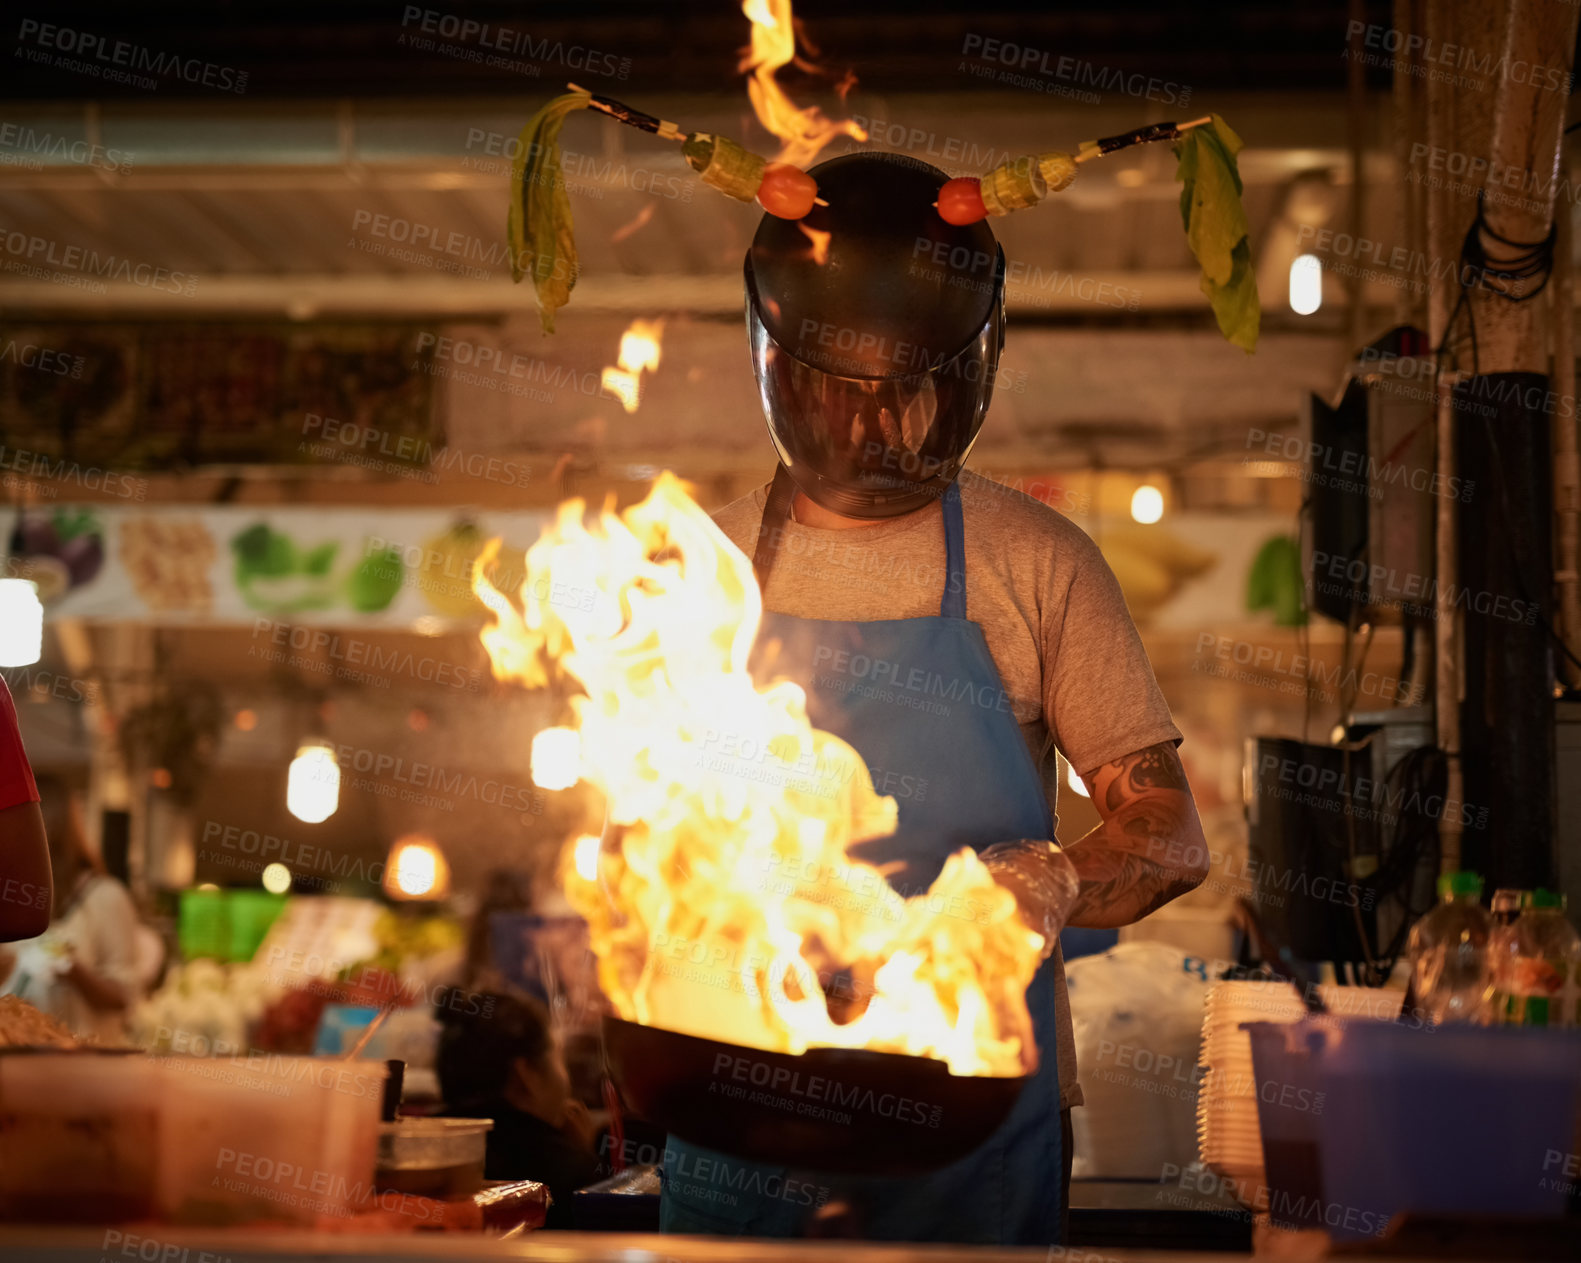 Buy stock photo Shot of an unidentifiable food vendor wearing a helmet while flambeing something in a pan